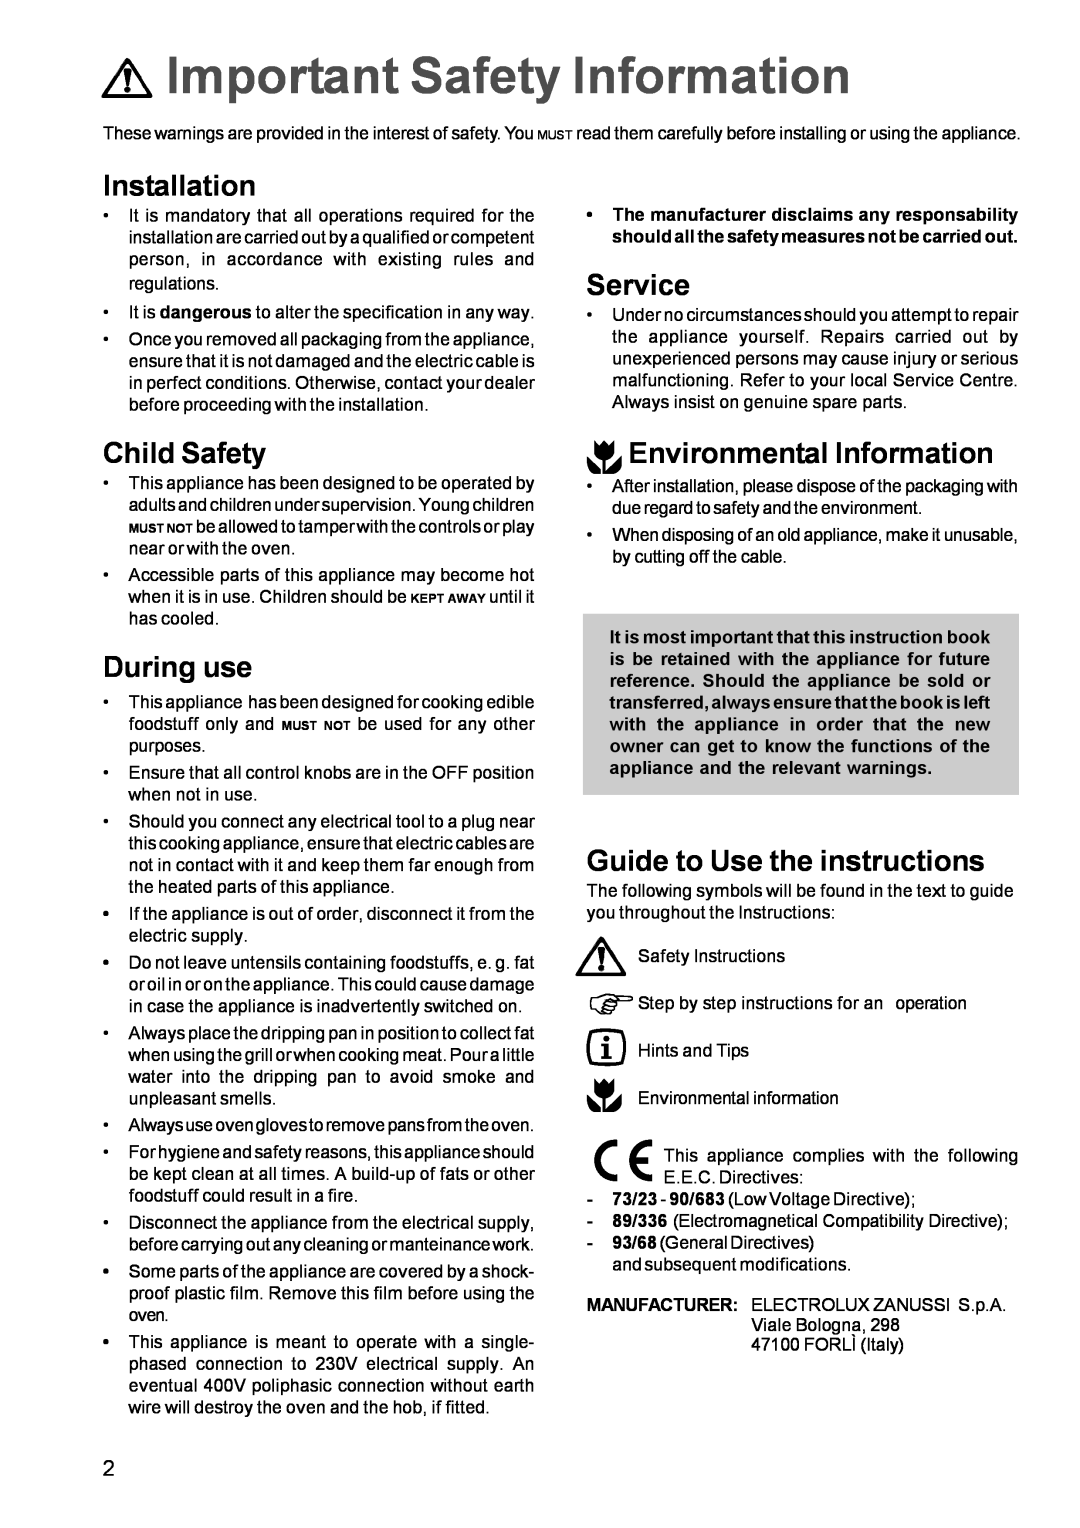 Zanussi ZOU 661 Installation, Service, Child Safety, During use, Environmental Information, Guide to Use the instructions 